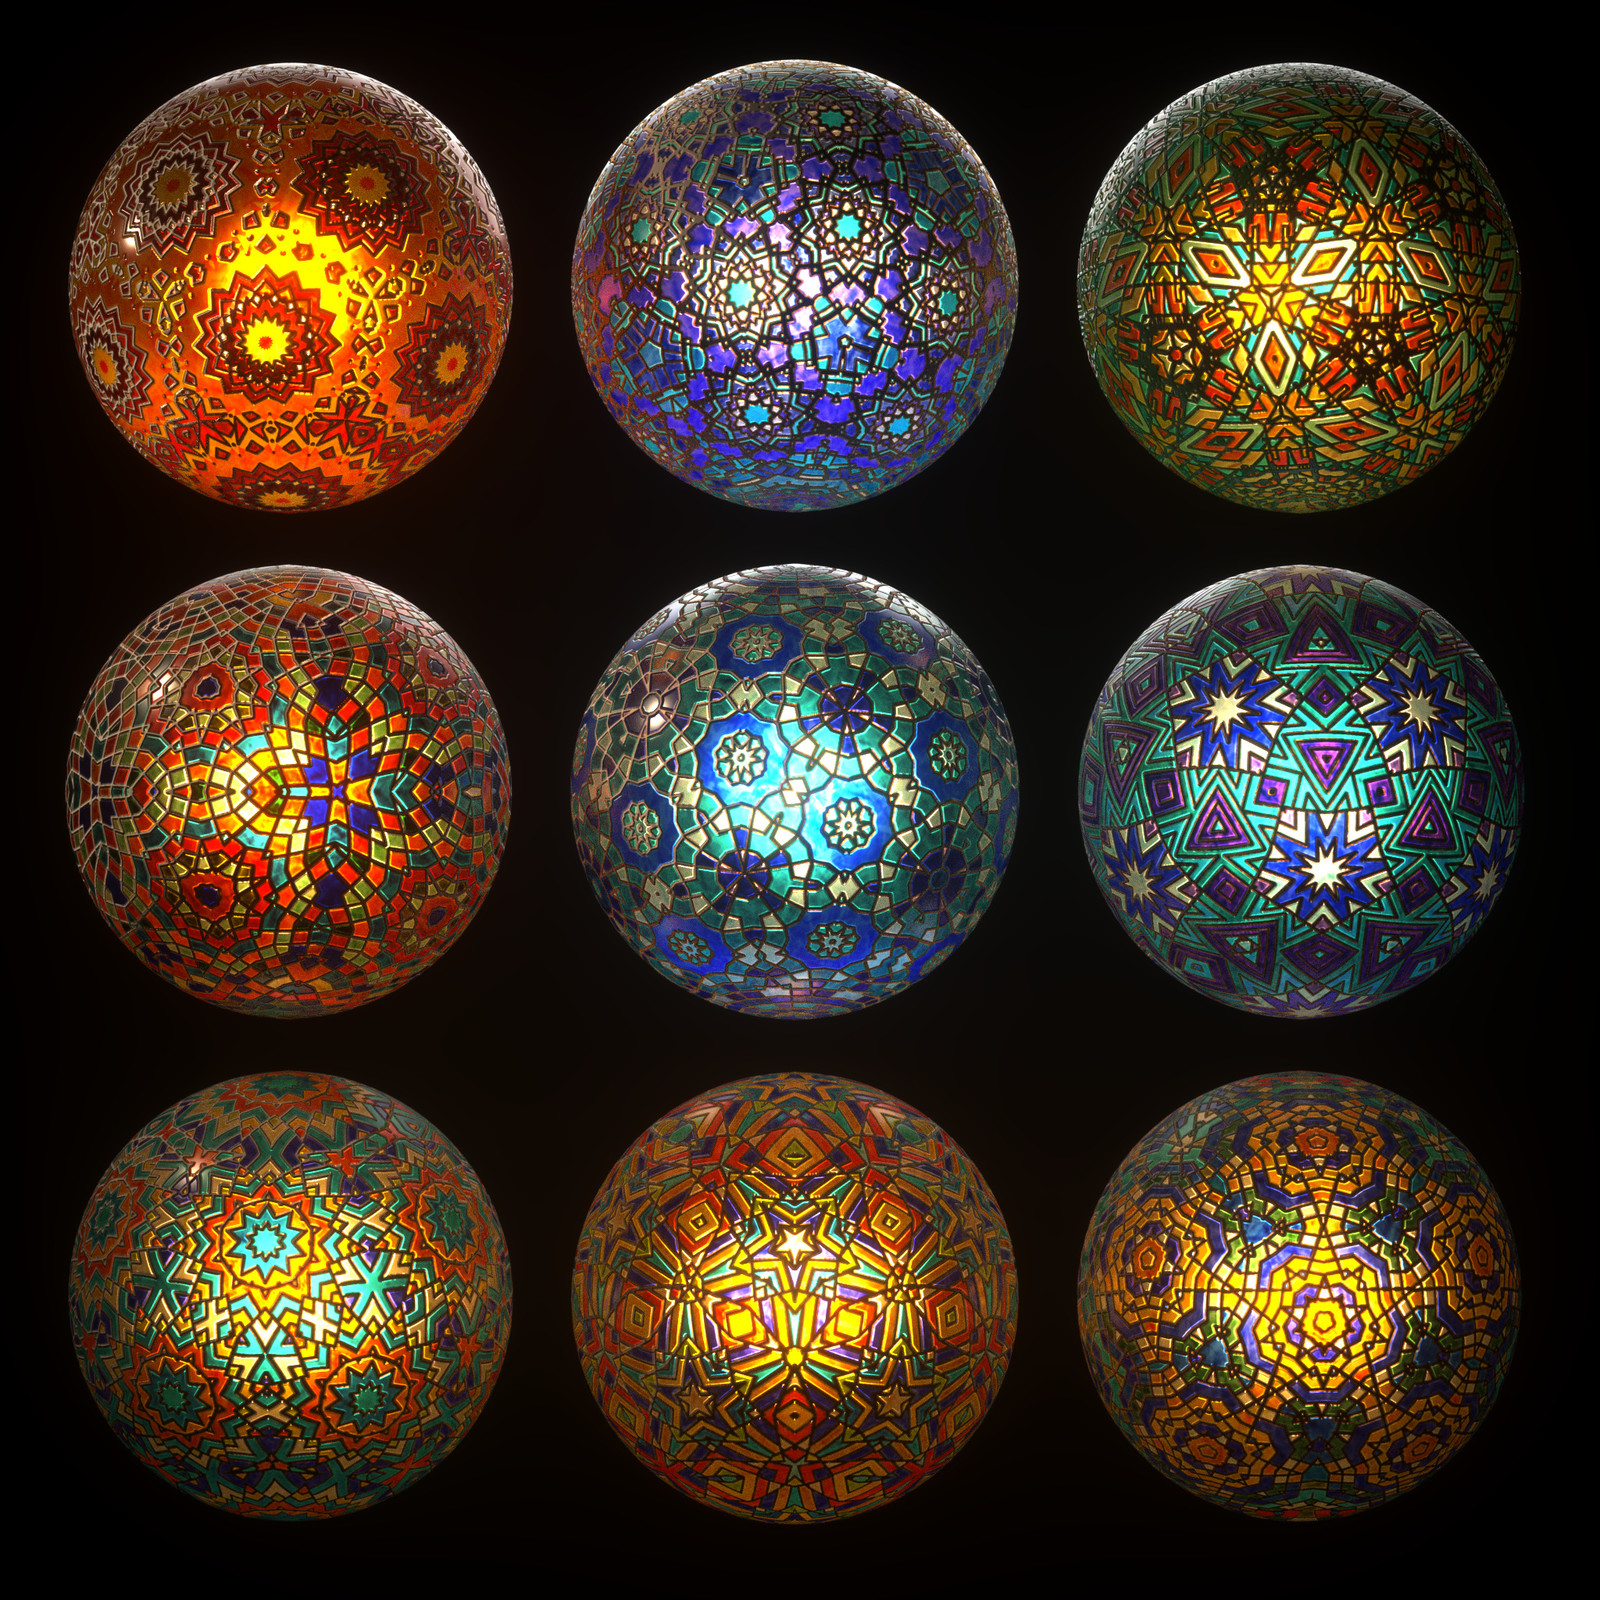 One of the trickier things to make was the lamp textures. These lamps are spherical, therefore the textures also had to be spherical. Since I wanted a whole bunch I explored some procedural ways to produce them.